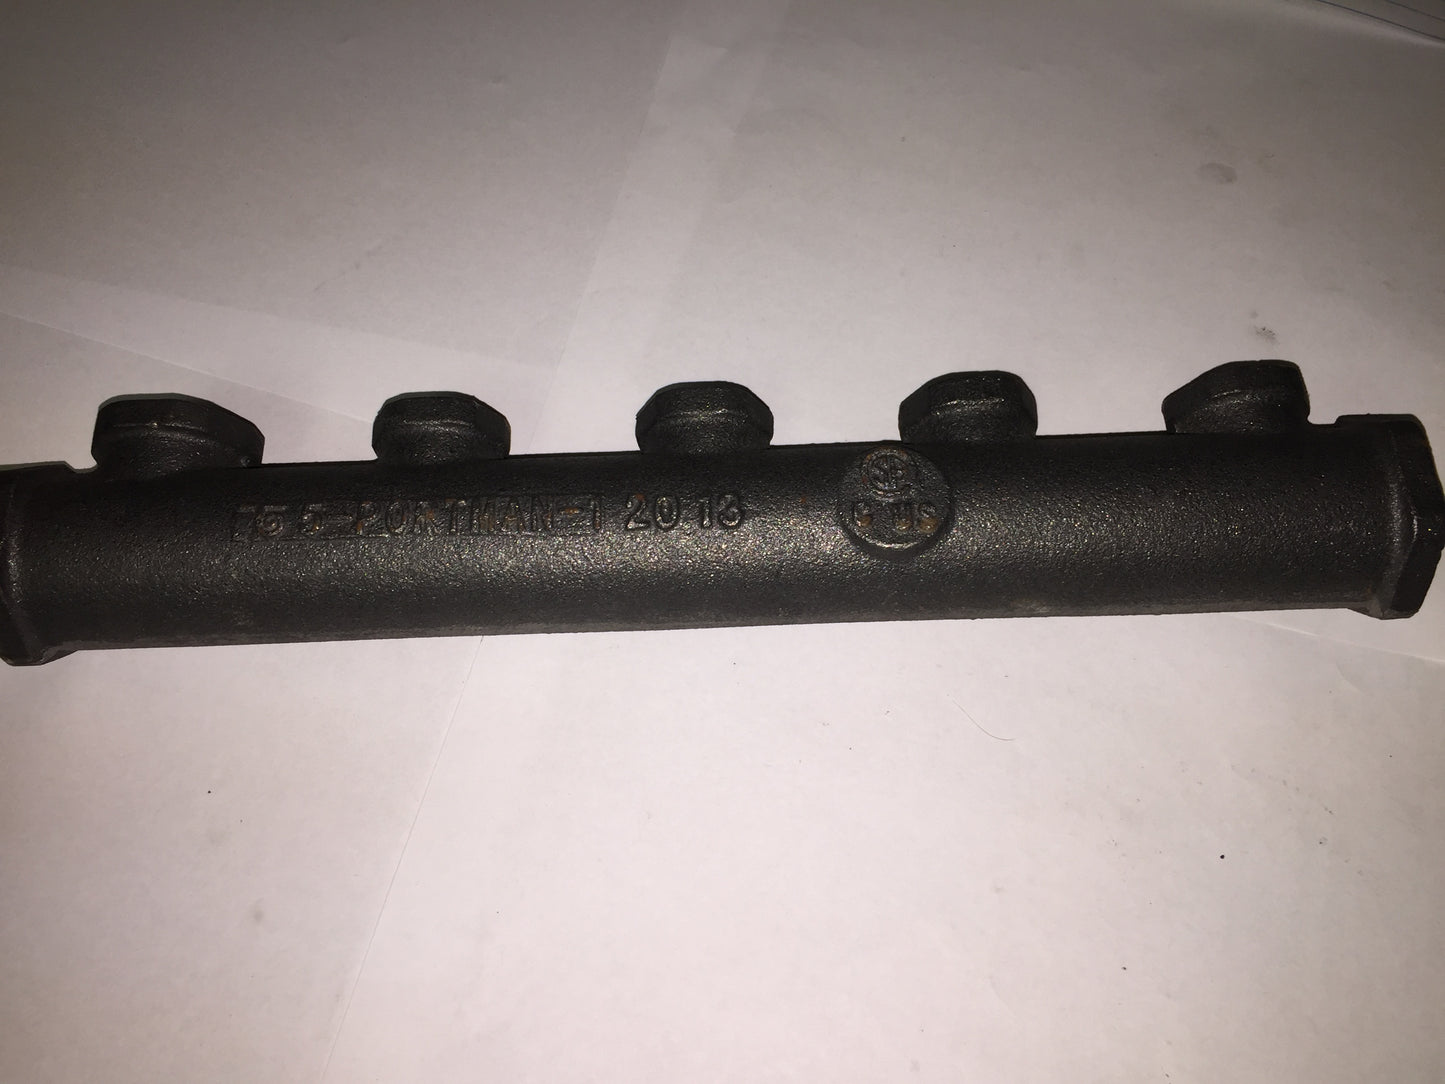 5 PORT CAST IRON GAS MANIFOLD 1" X 3/4" OUTLET X (4) 1/2" INLET